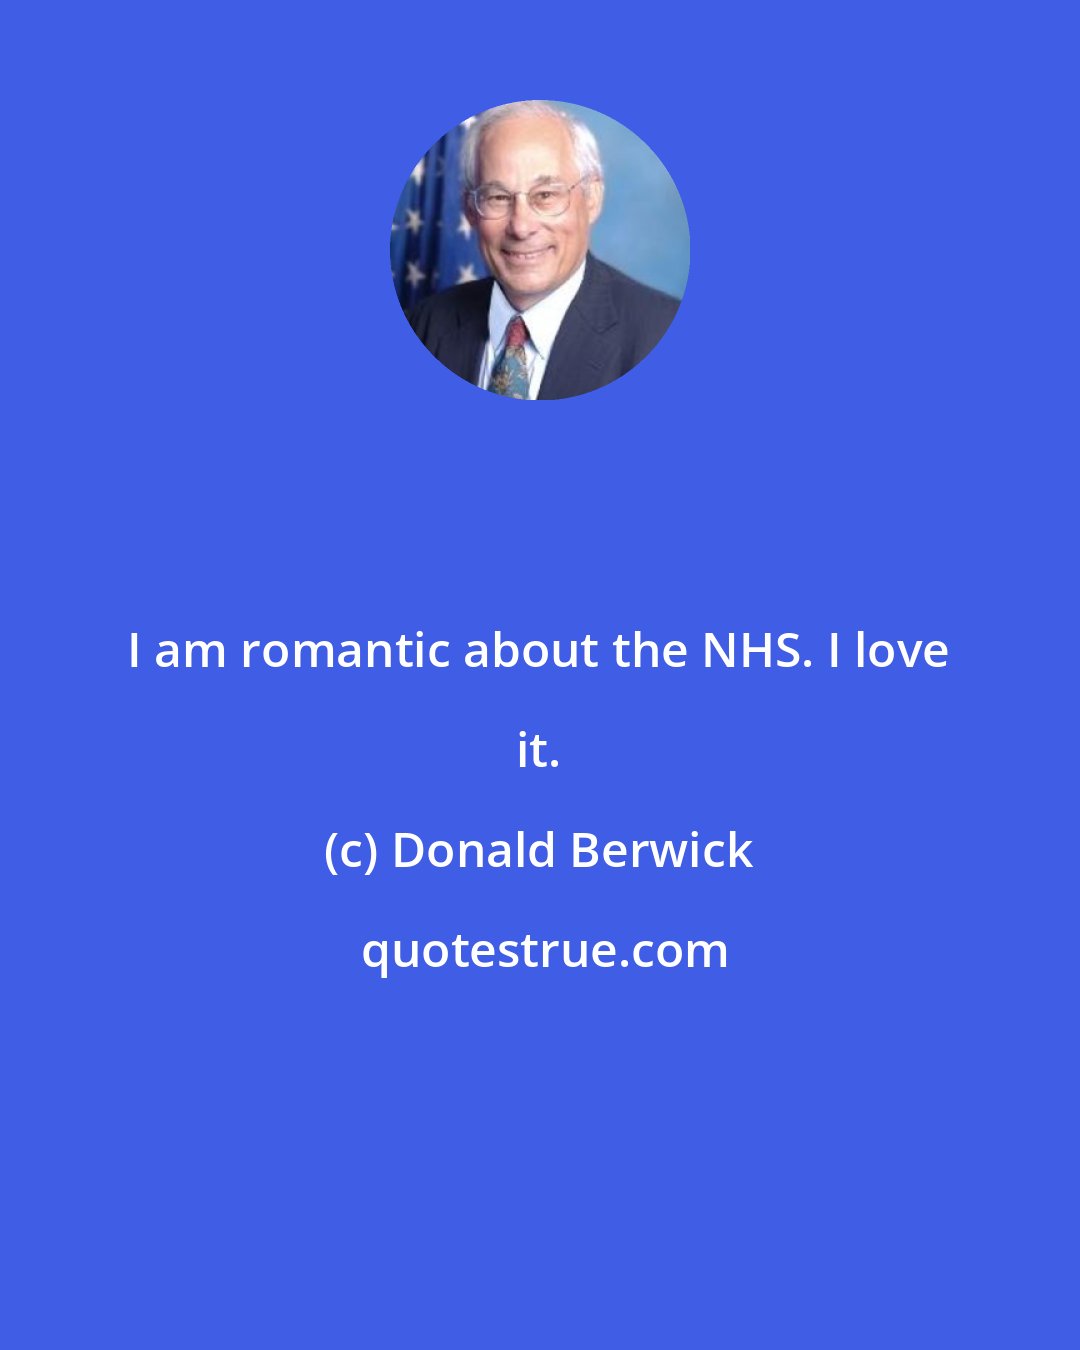 Donald Berwick: I am romantic about the NHS. I love it.